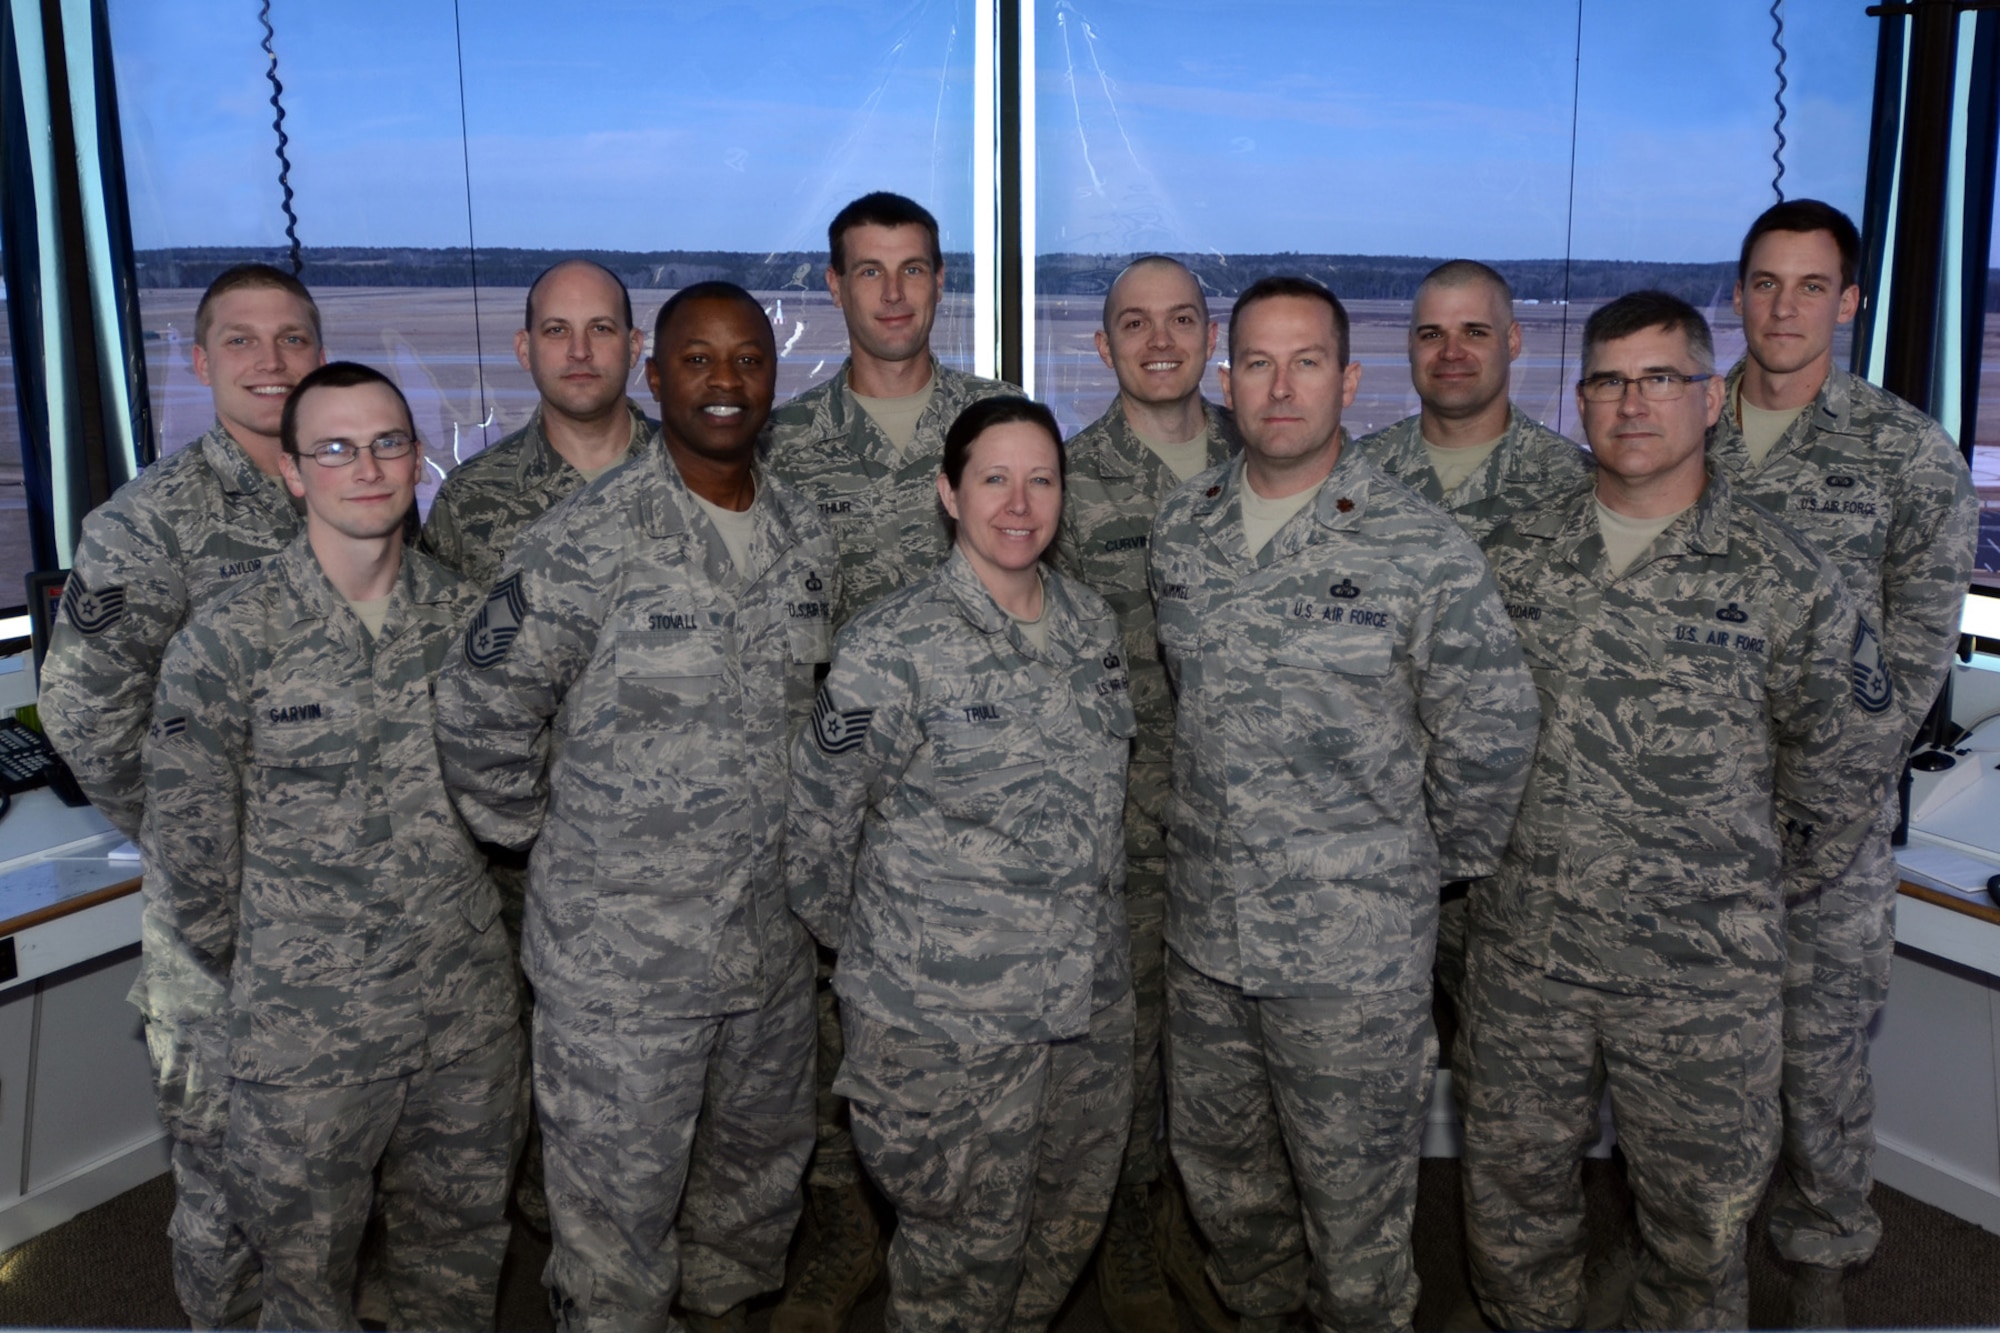 Members of the 245th Air Traffic Control Squadron at McEntire Joint National Guard Base, S.C., pose for a photo in the control tower, Feb. 20, 2013. The group was awarded the Airfield Operations Flight Complex of the Year.
(National Guard photo by Tech. Sgt. Caycee Watson/Released)